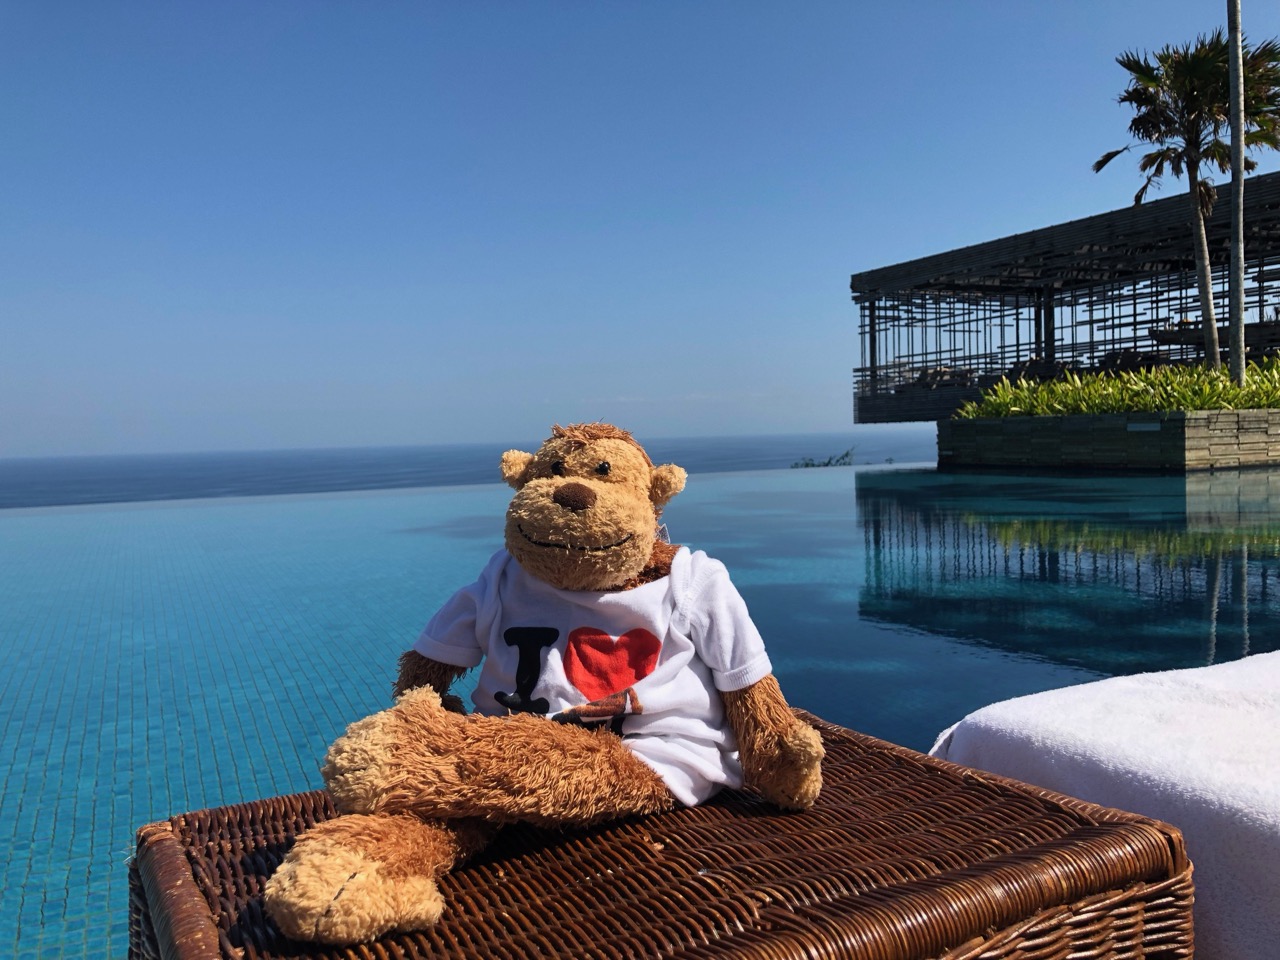 a stuffed animal sitting on a chair by a pool